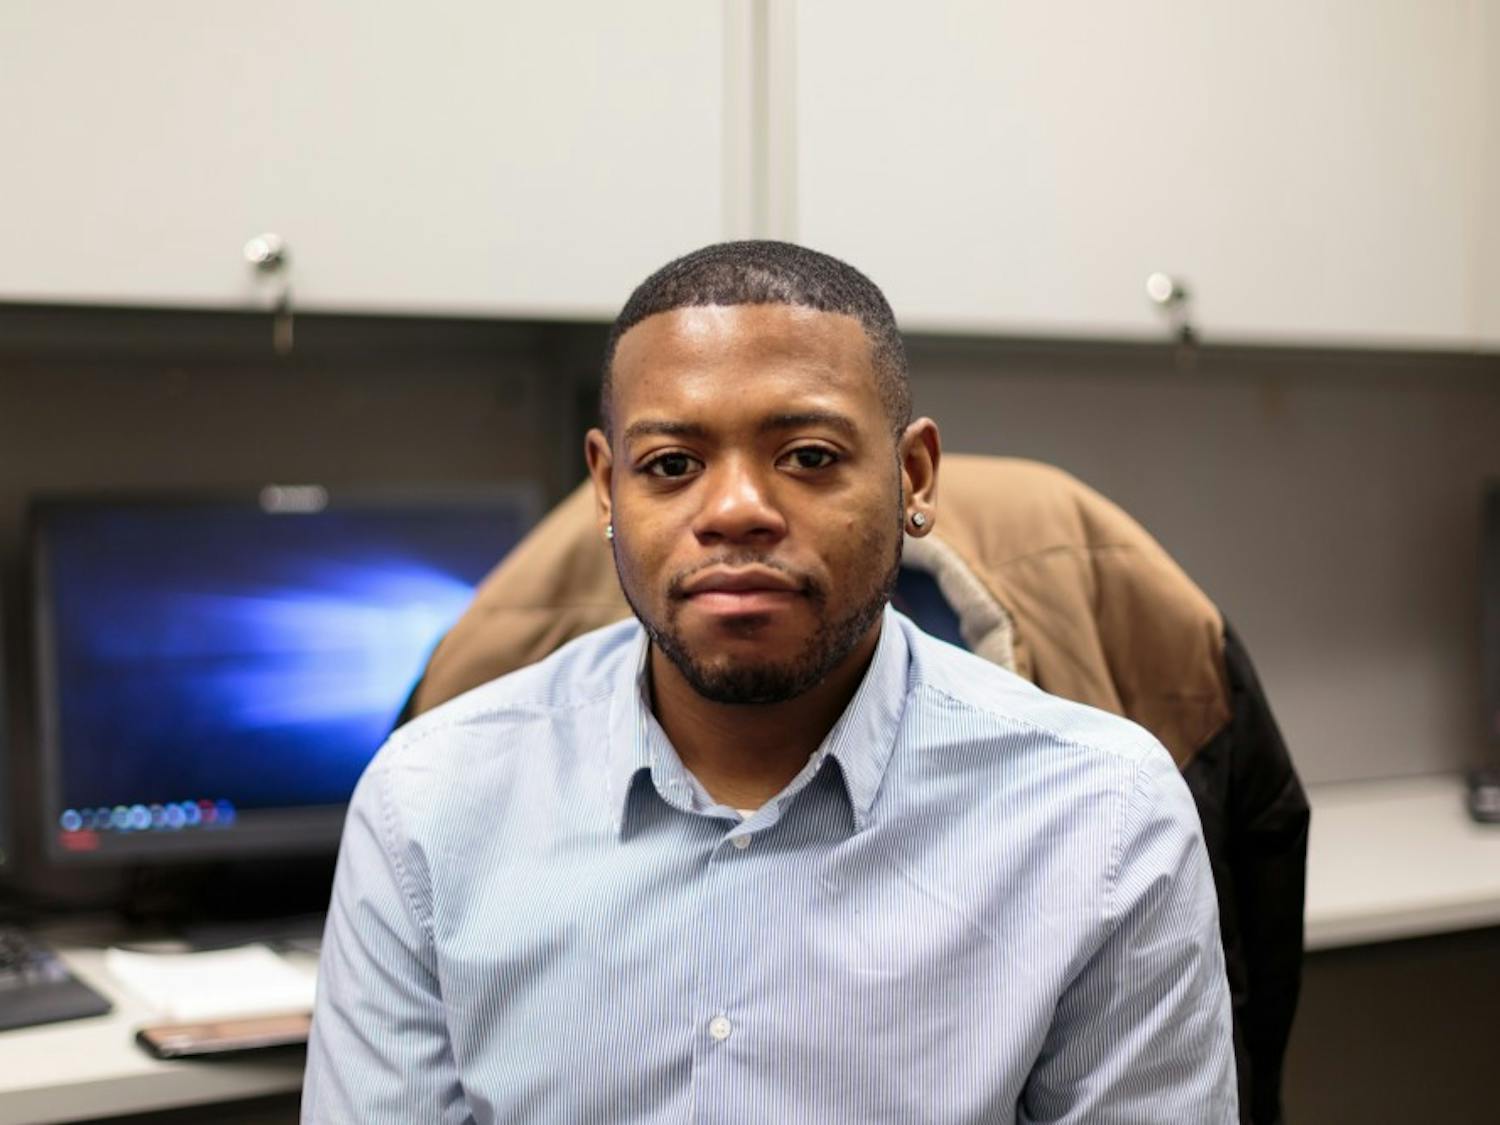 Henry Willis is a graduate student in the psychology program and is working to create a mobile application for mental health for African American young adults.